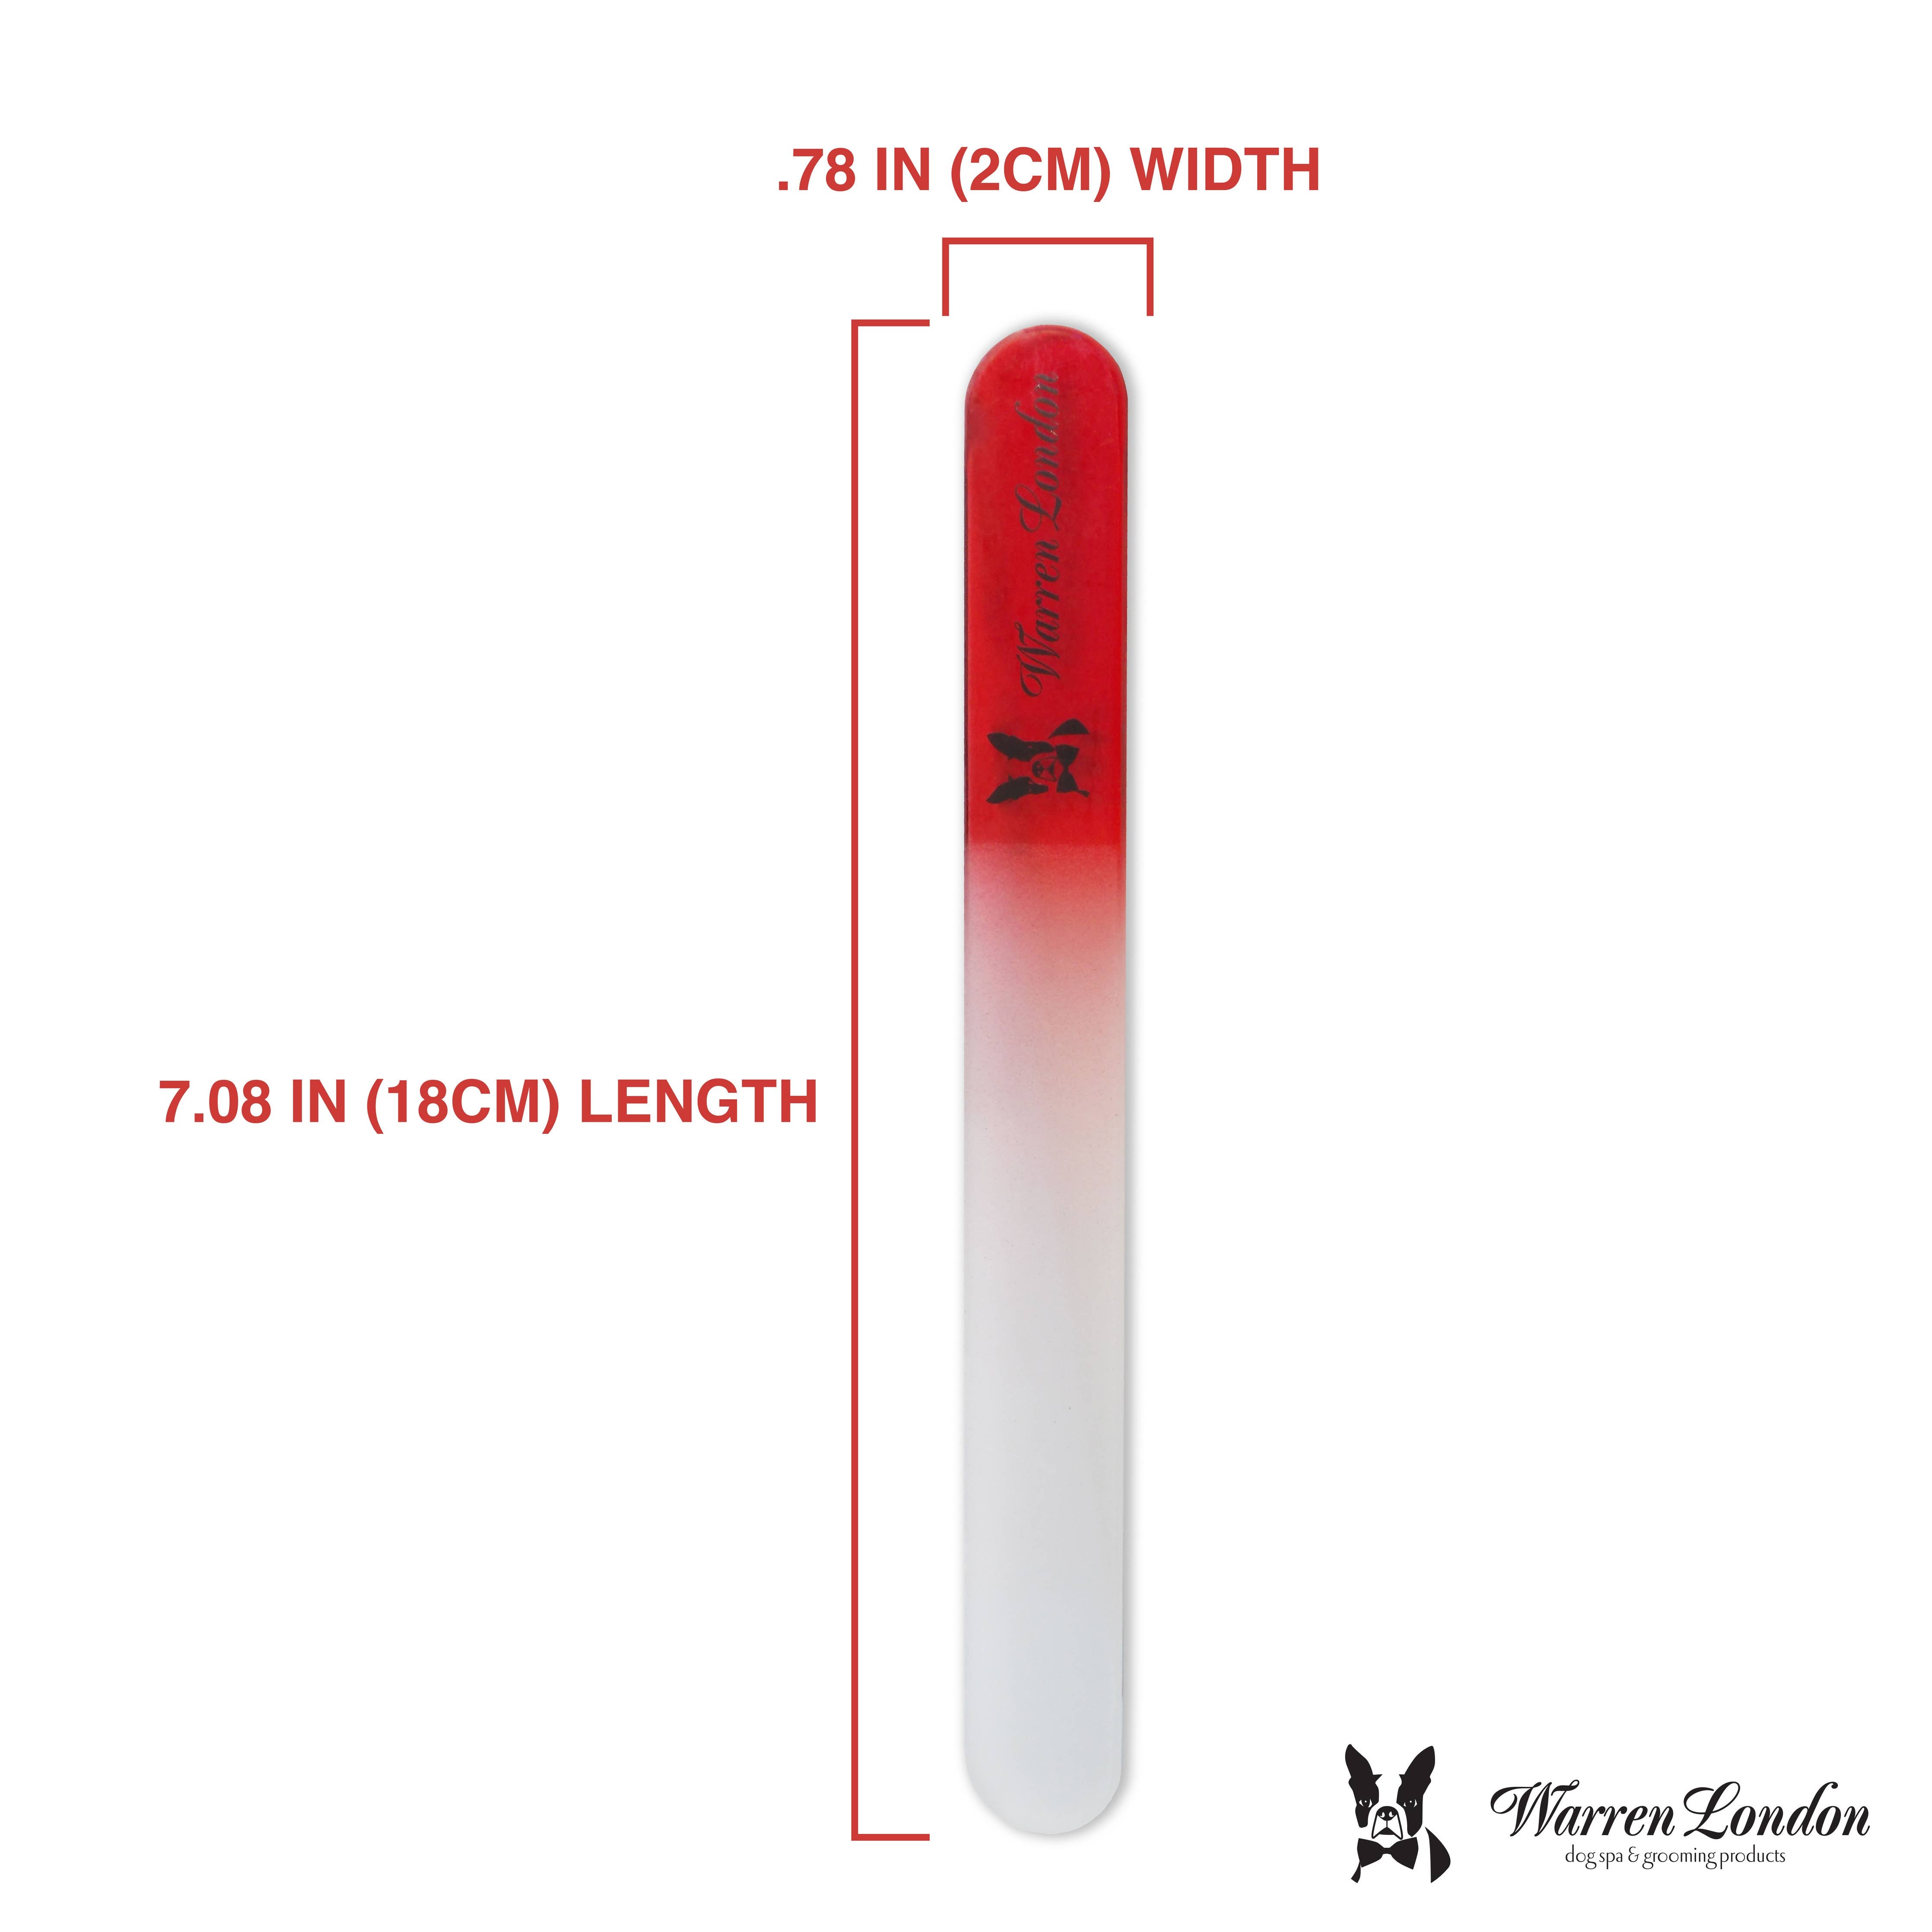 Warren London Dog Products - WL Glass Nail File - Red